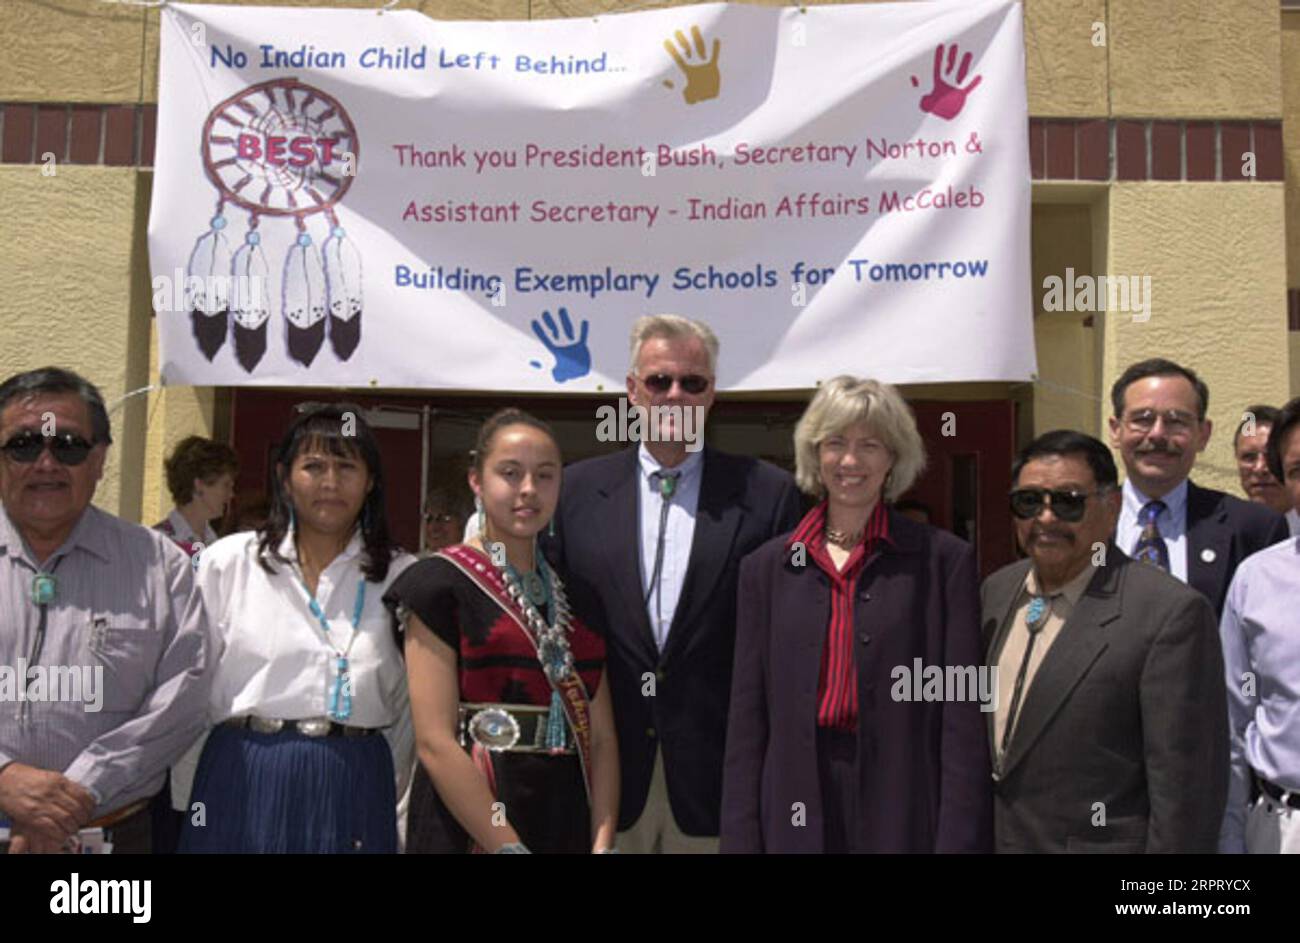 Secretary Gale Norton, second from right, with school staff in front of No Indian Child Left Behind banner during visit to To Hajiilee-He Community School, an Eastern Navajo Agency-operated school in Canoncito, New Mexico. Visit highlighted federal support for American Indian schools, and such initiativesas the Family and Child Education Program Stock Photo